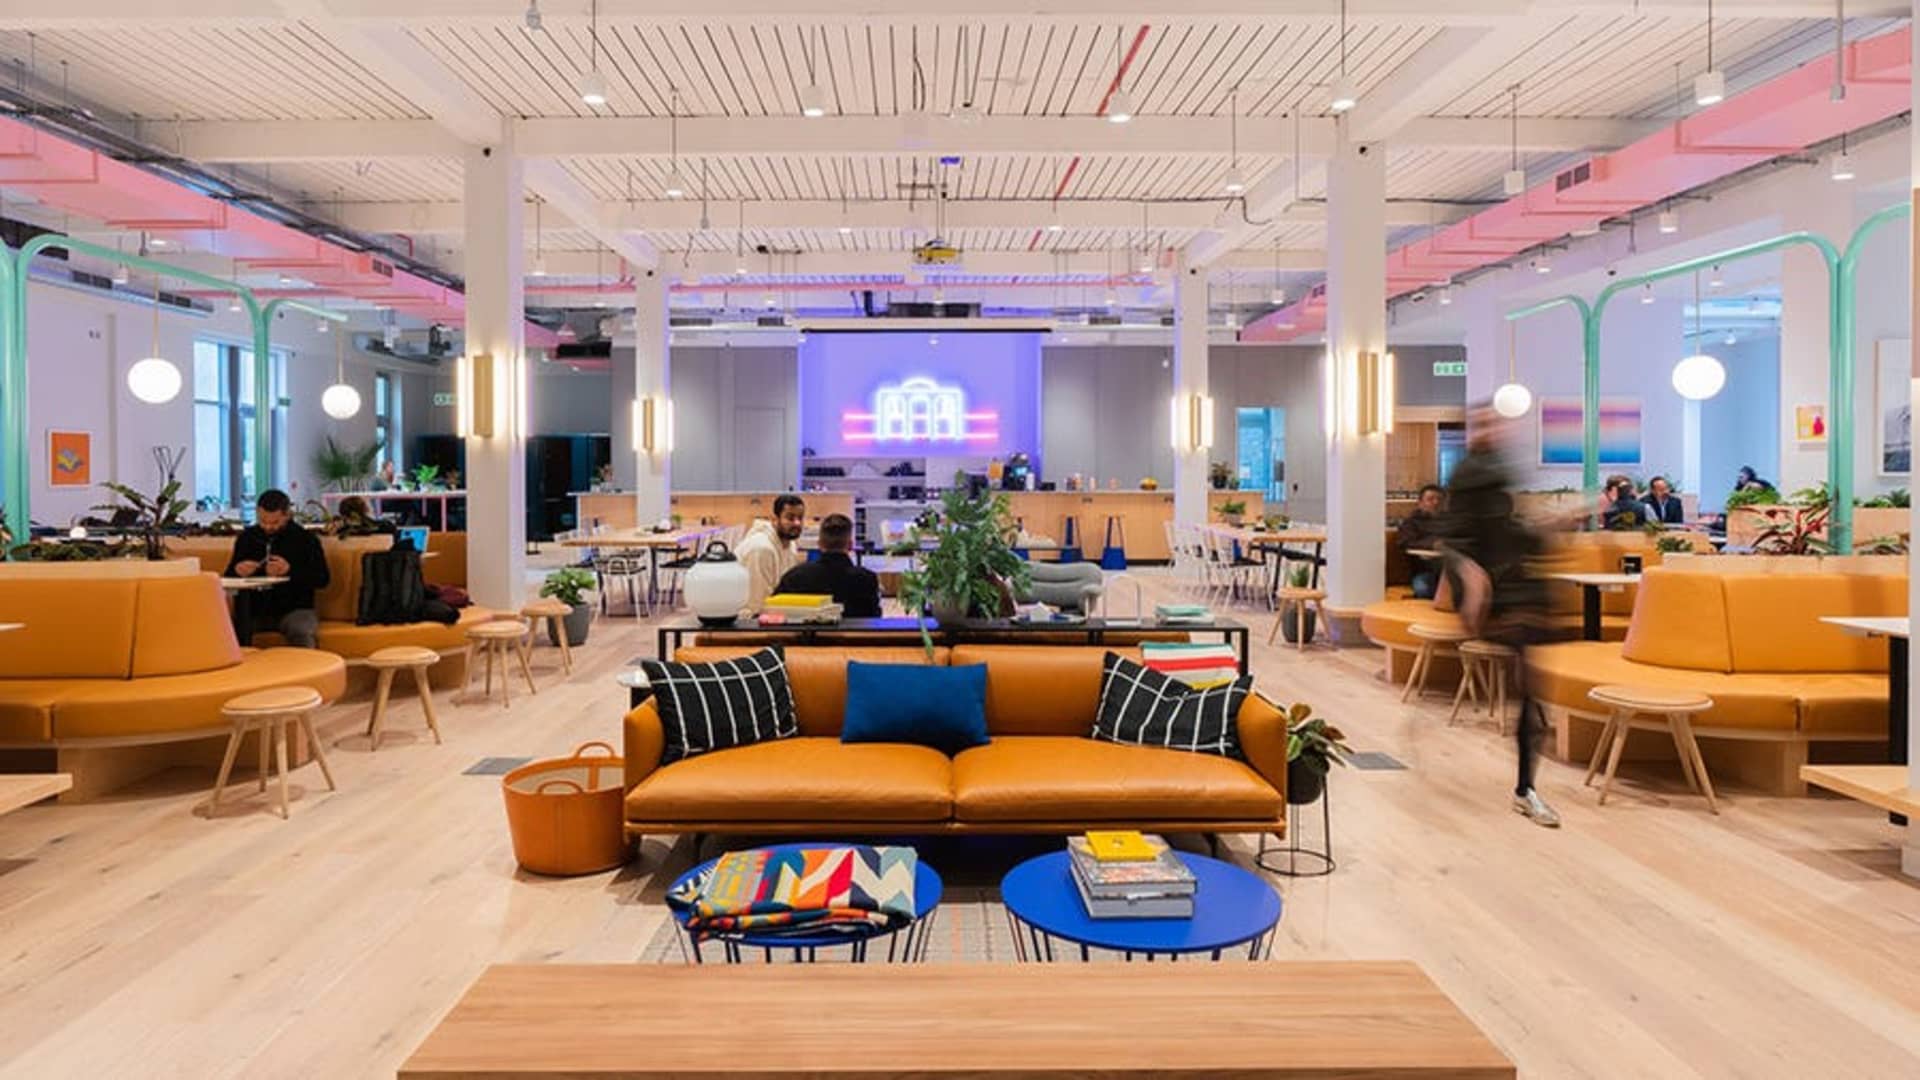 WeWork has a massive footprint in London. Its bankruptcy could shake up the city's office market